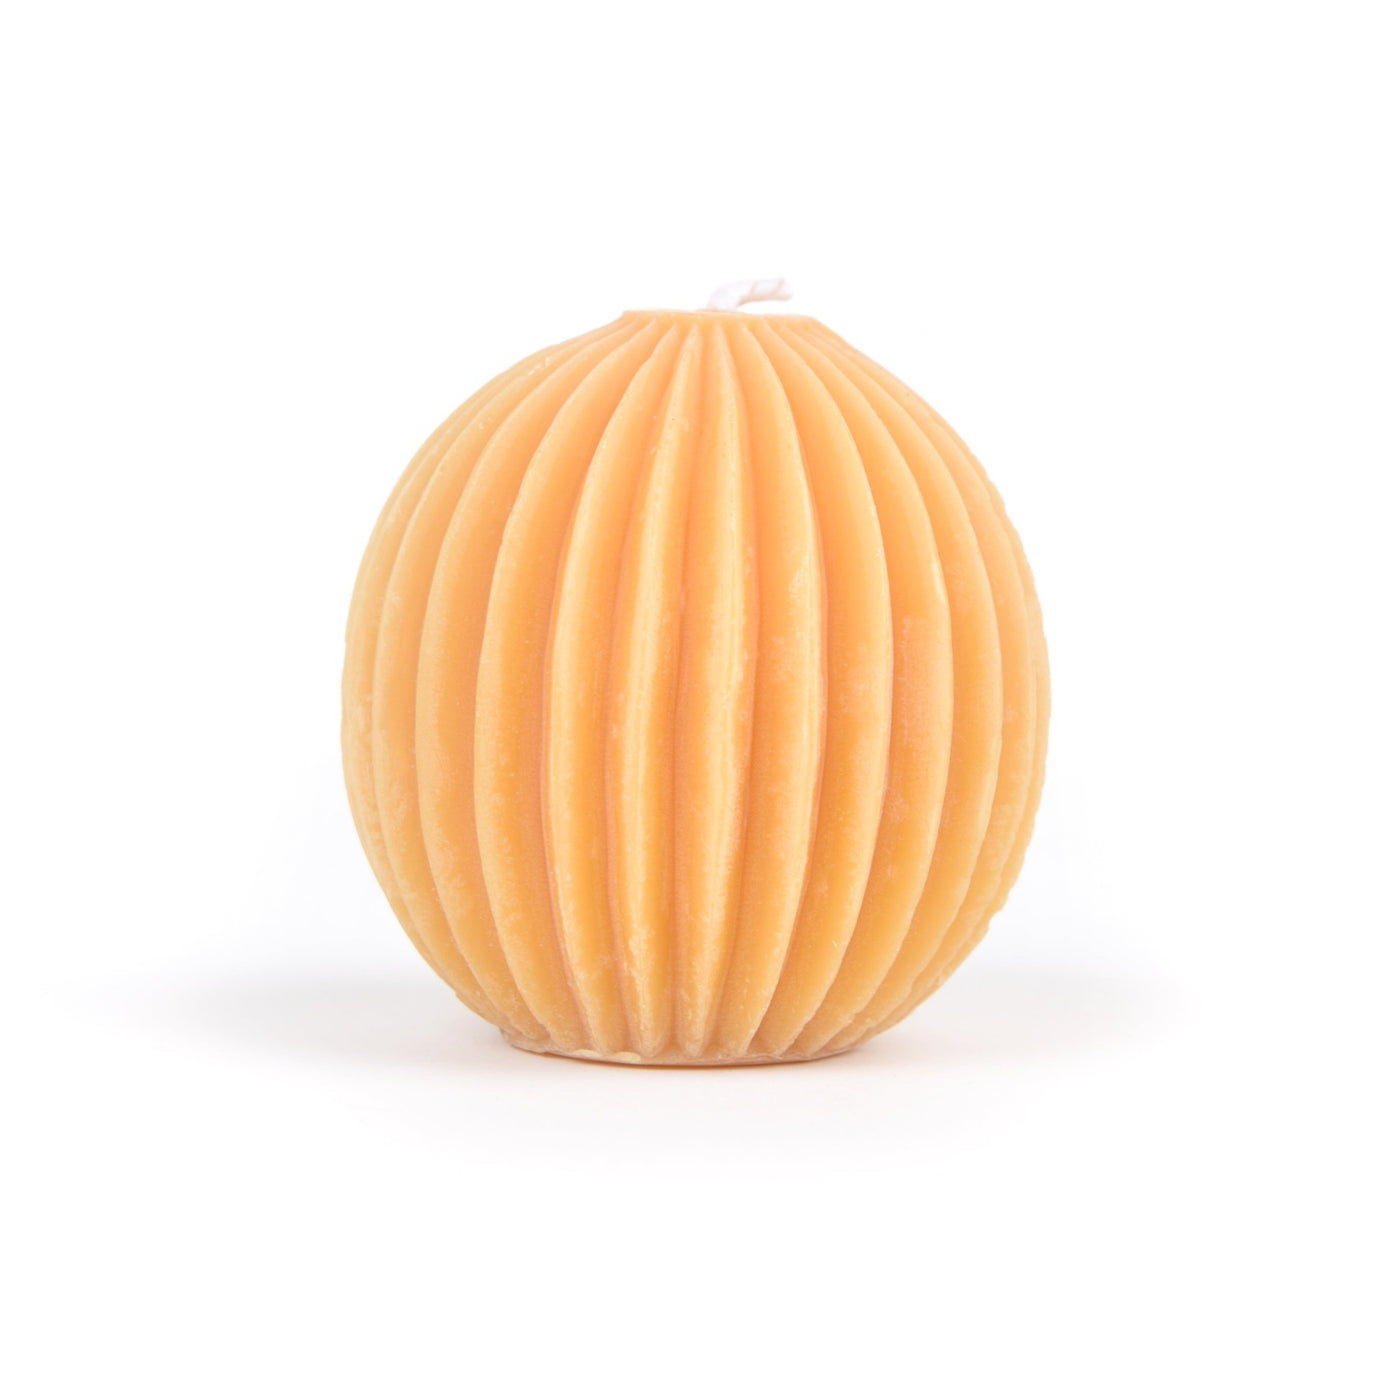 Honey Candles 3 Inch beeswax fluted sphere candle (401137598504)